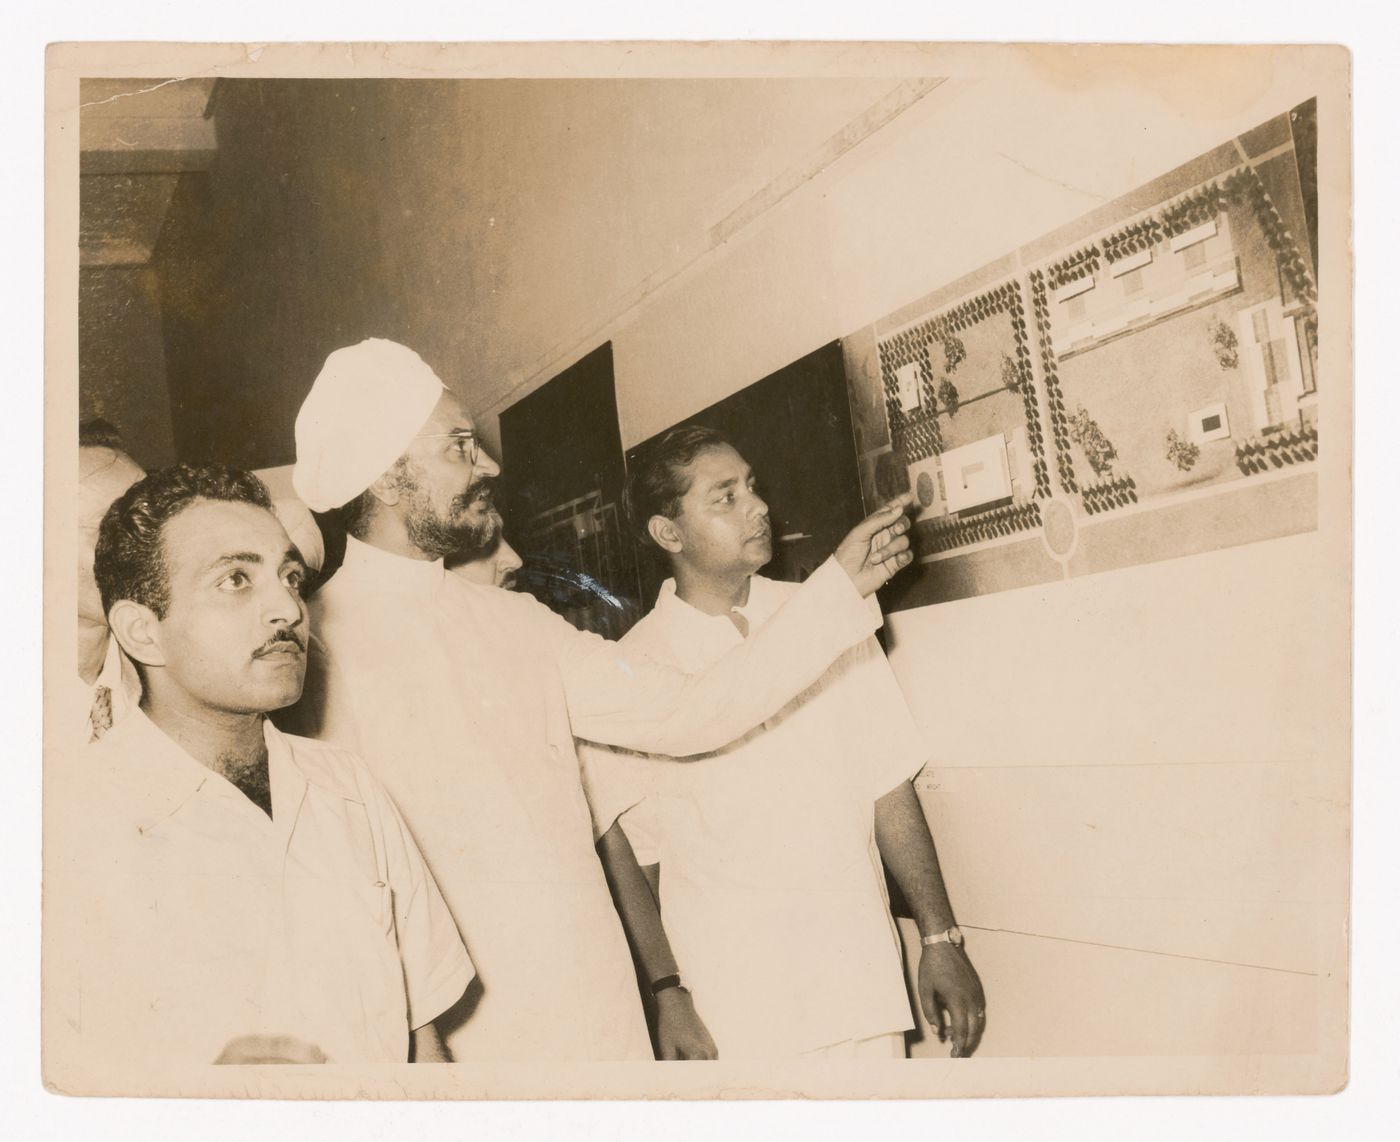 Photograph of Aditya Prakash showing material at an unidentified exhibition